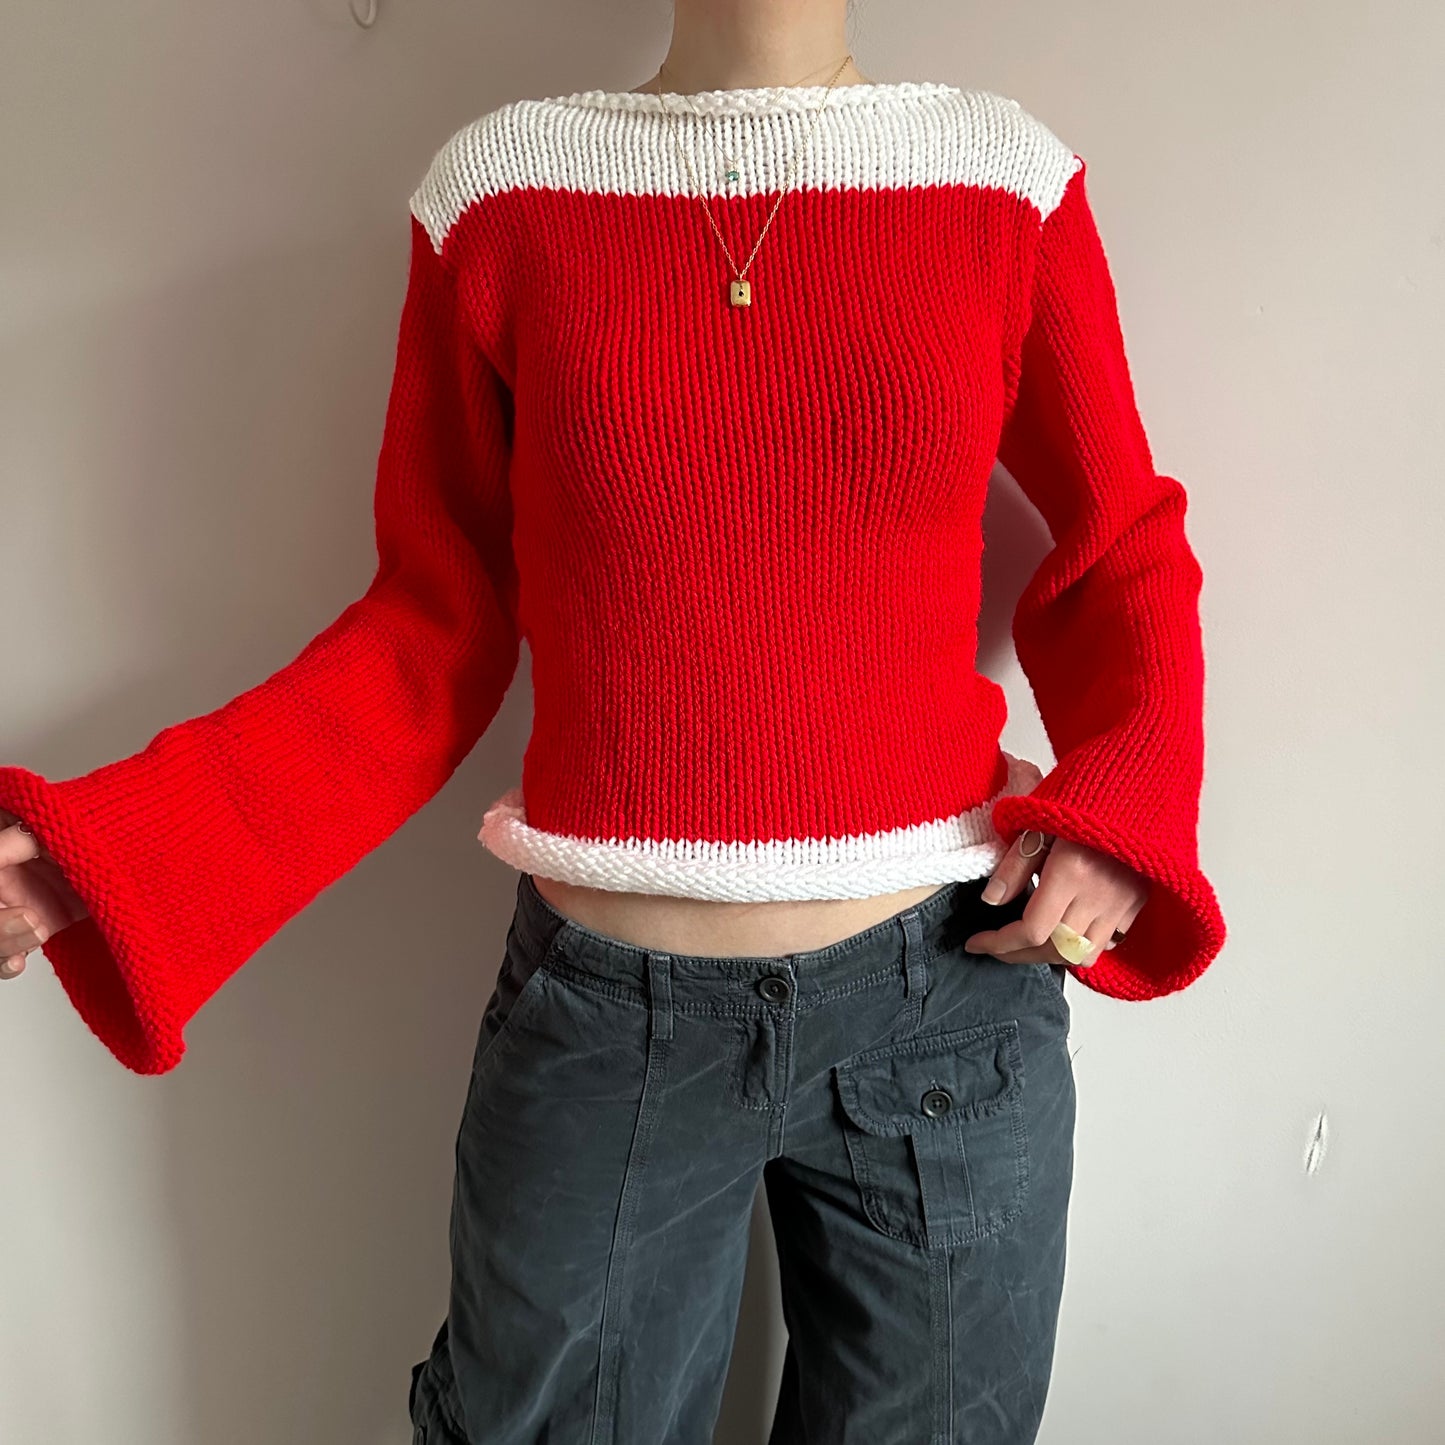 Handmade knitted colour block jumper in red and white